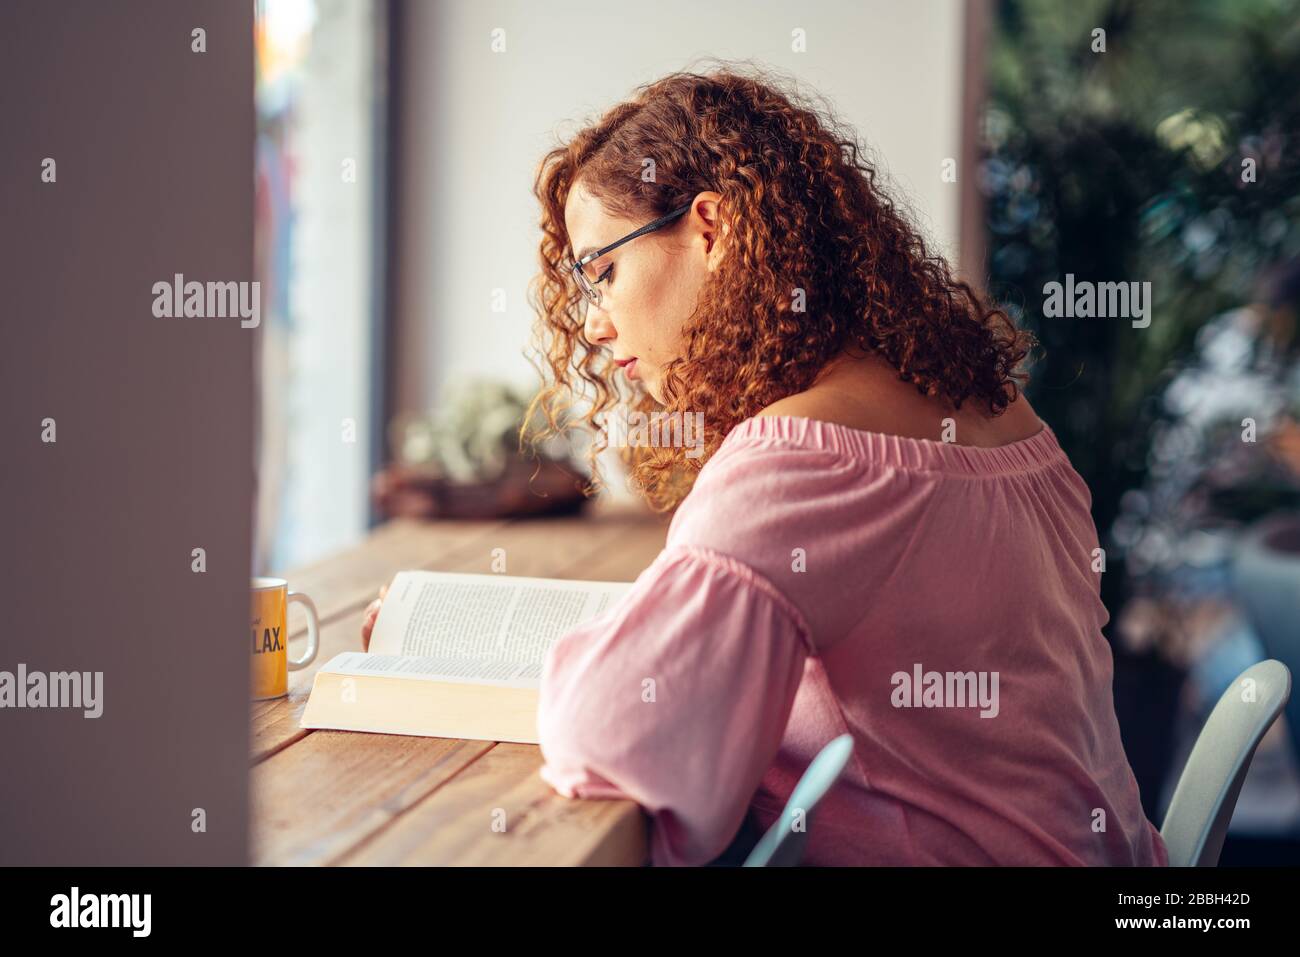 Young red hair woman with eyeglasses is sitting and reading a book. Stock Photo